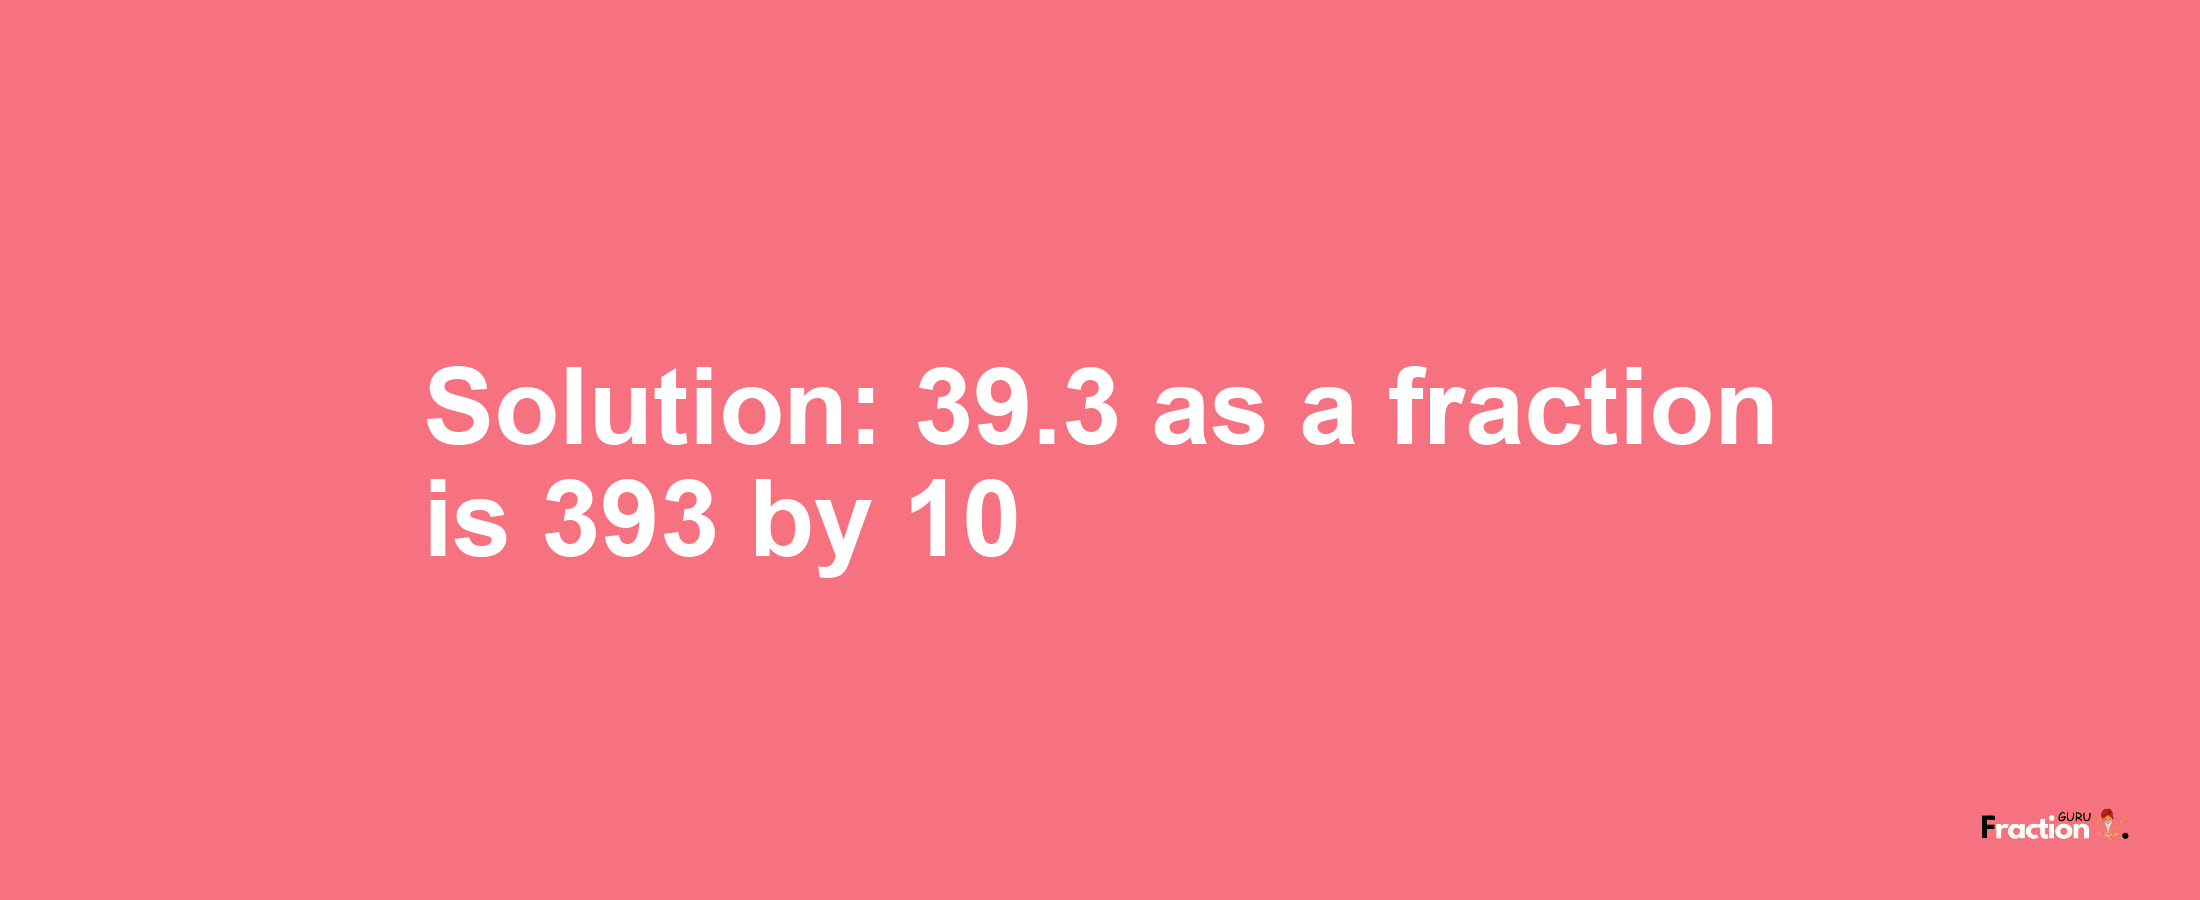 Solution:39.3 as a fraction is 393/10